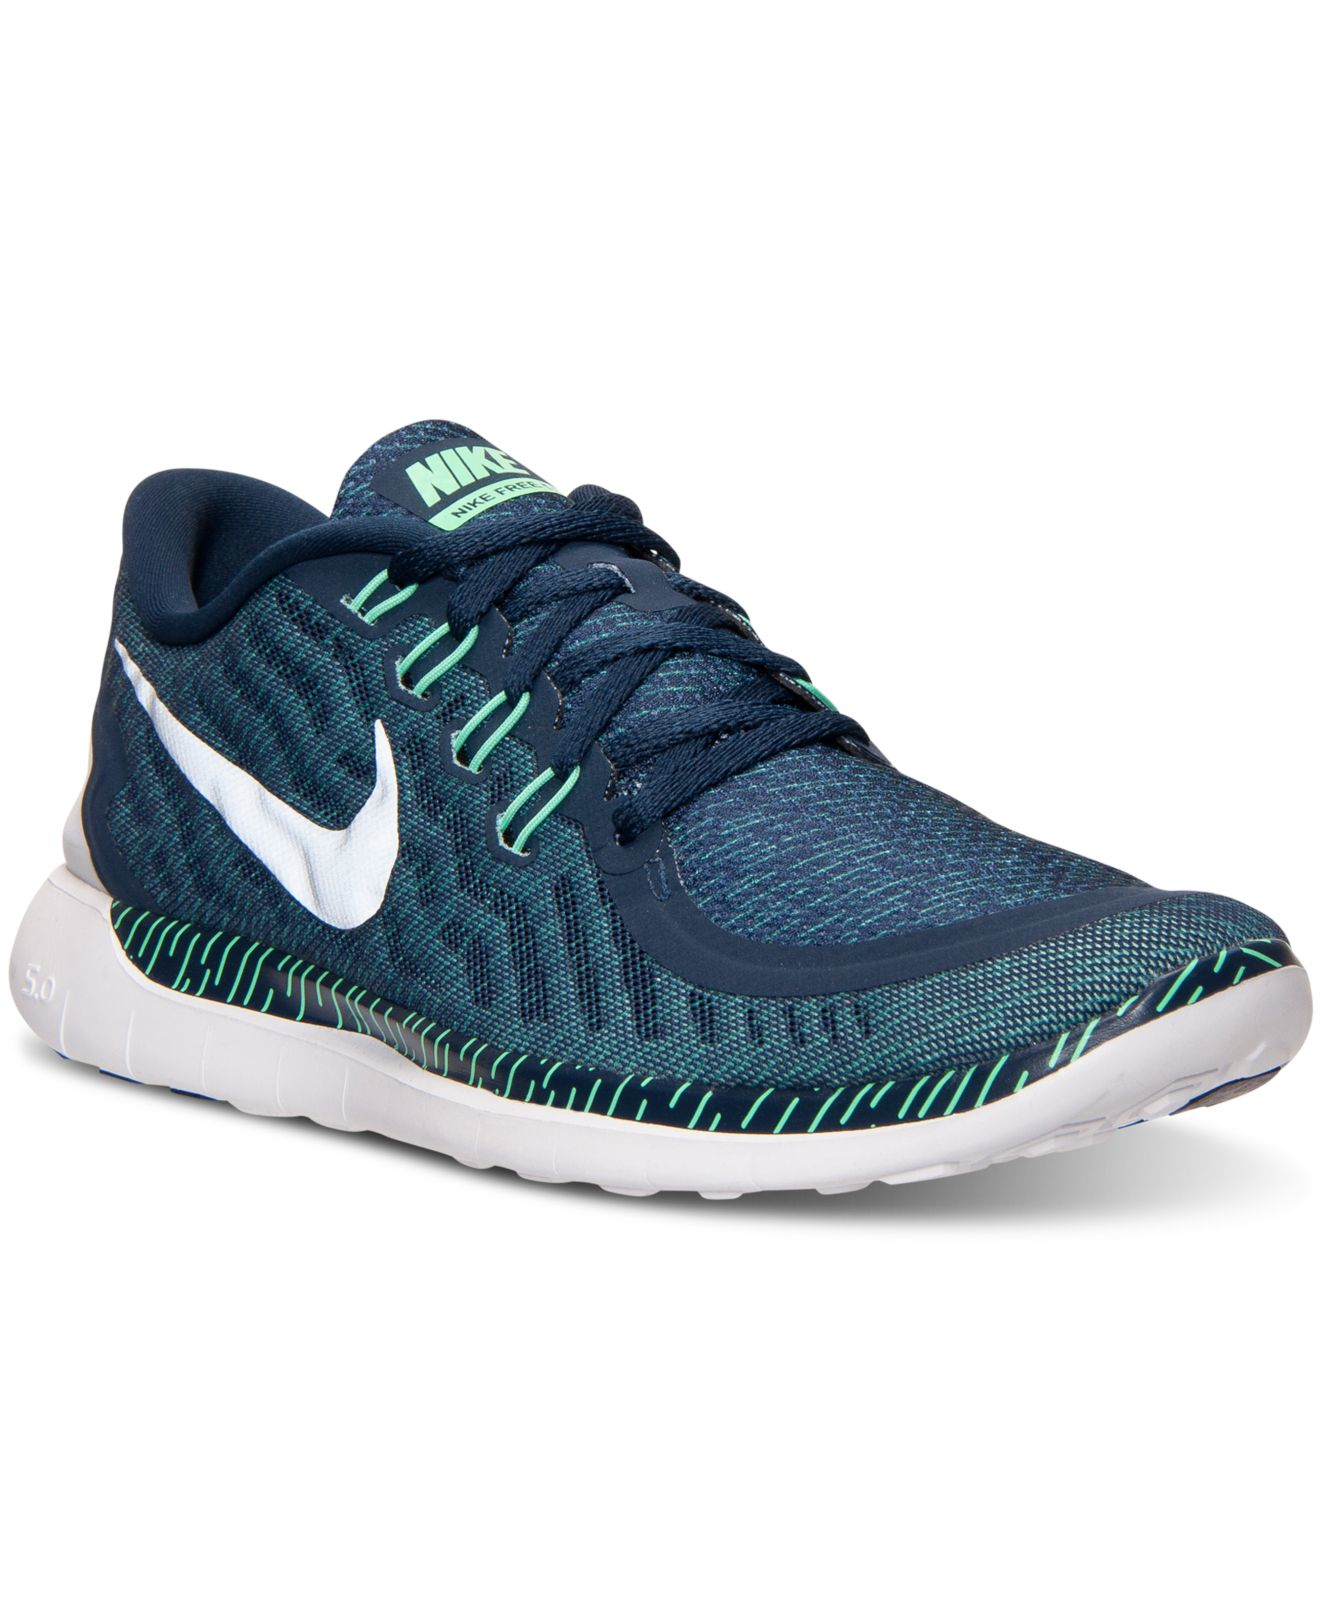 Lyst - Nike Men's Free 5.0 Print Running Sneakers From Finish Line in ...